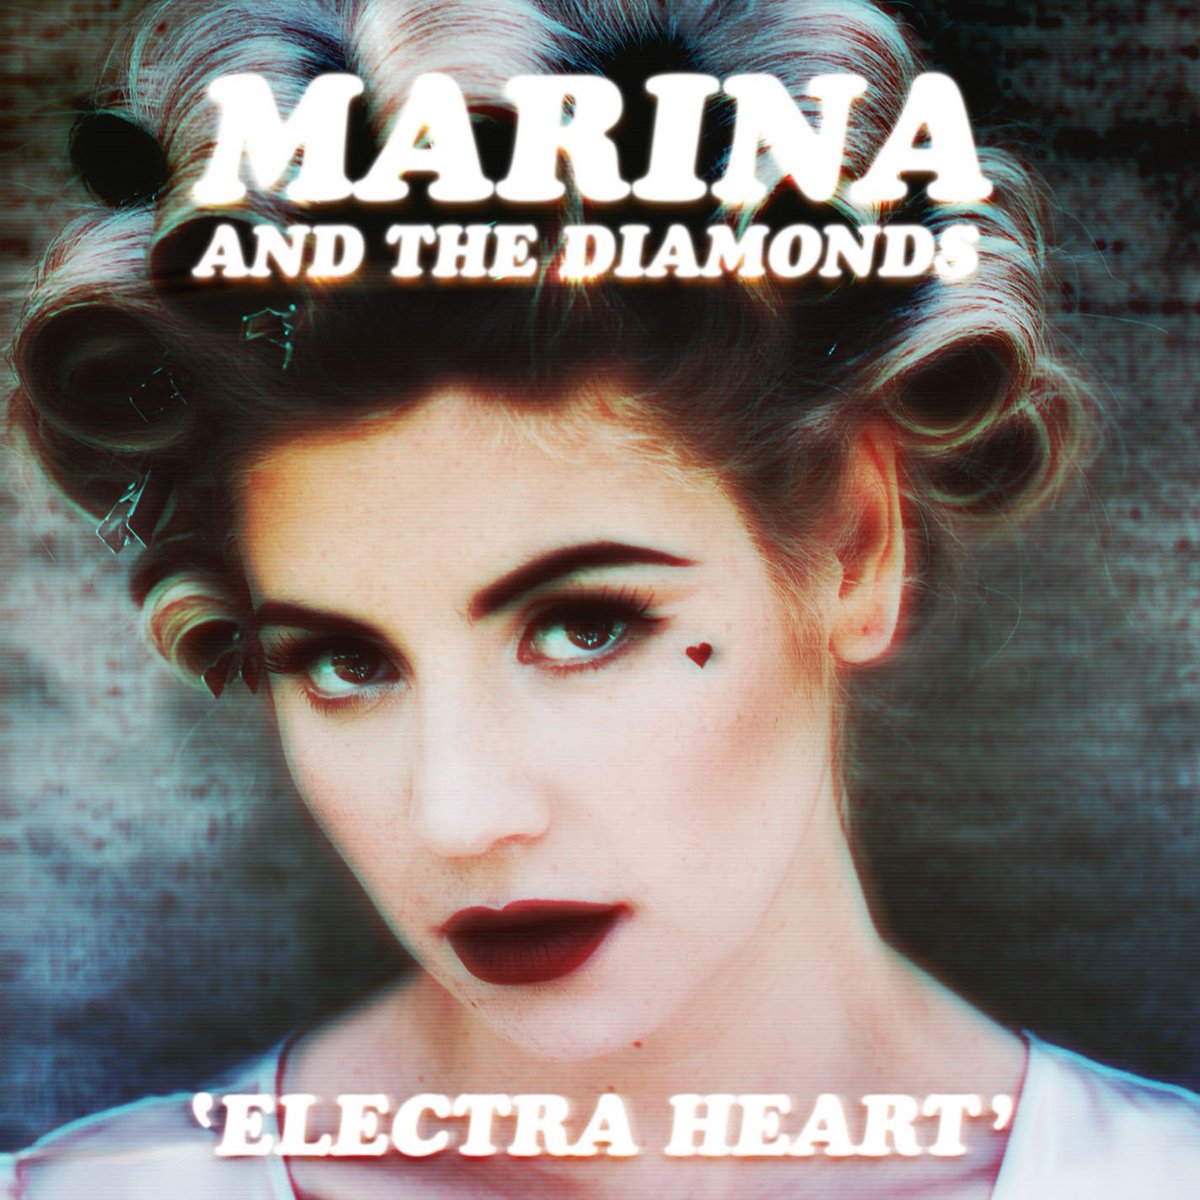 mystic messenger characters as songs off of marina’s “electra heart”— contains spoilers